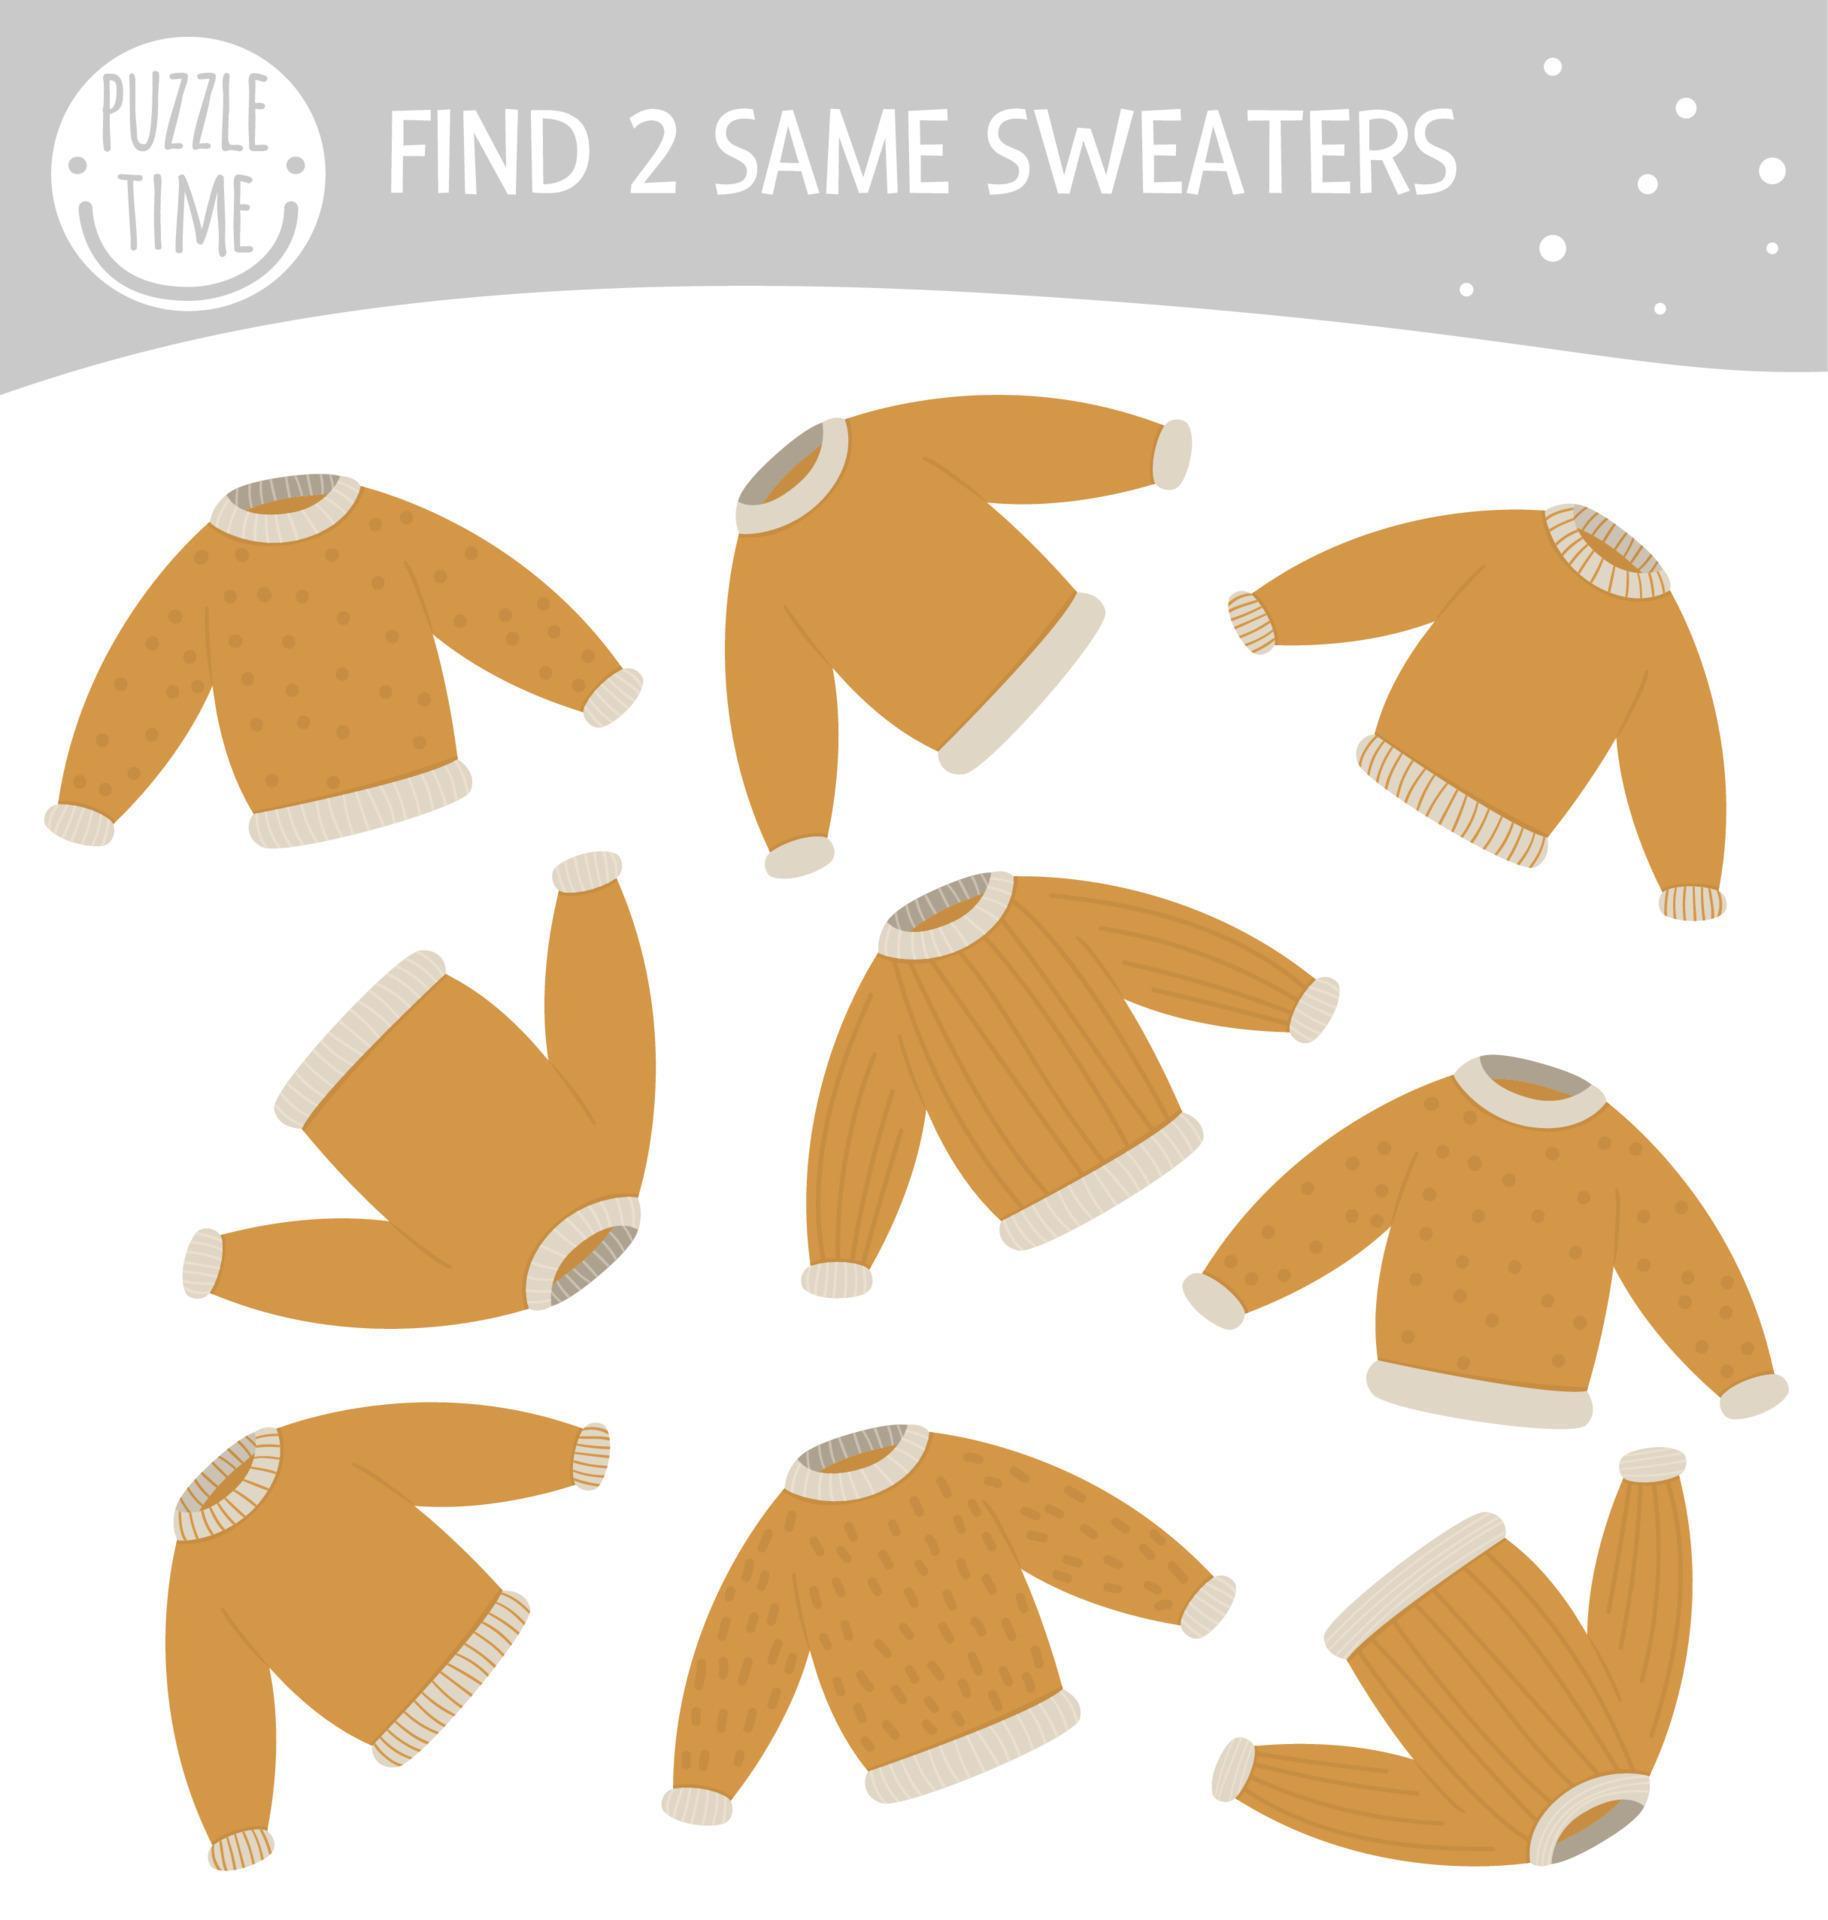 find-two-same-sweaters-winter-matching-activity-for-preschool-children-funny-game-for-kids